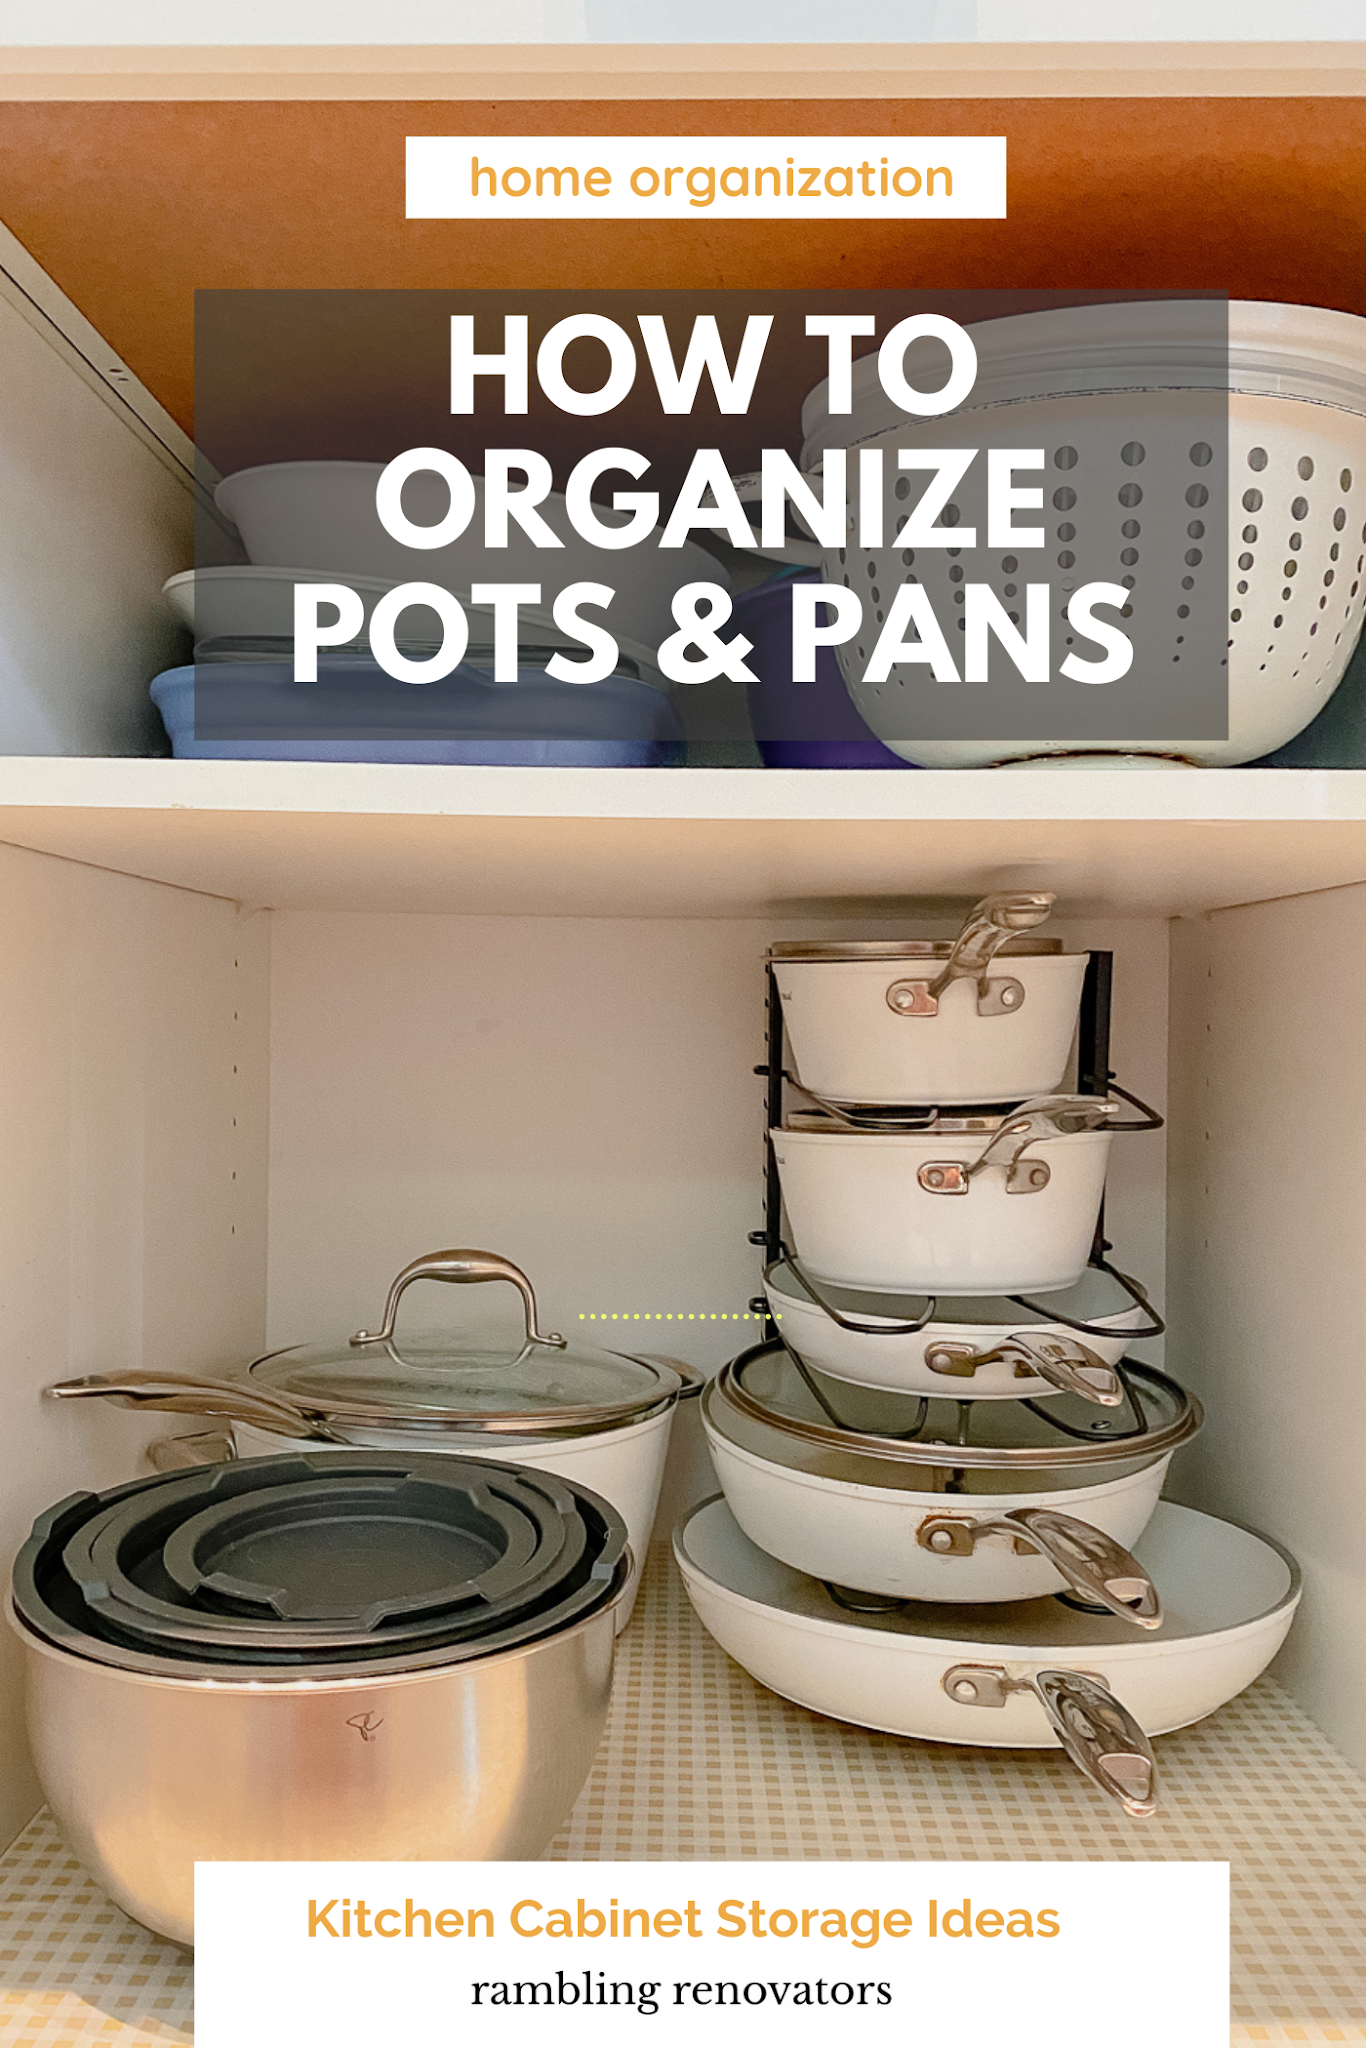 how to organize pots and pans, pots and pans storage ideas, pots and pans organization